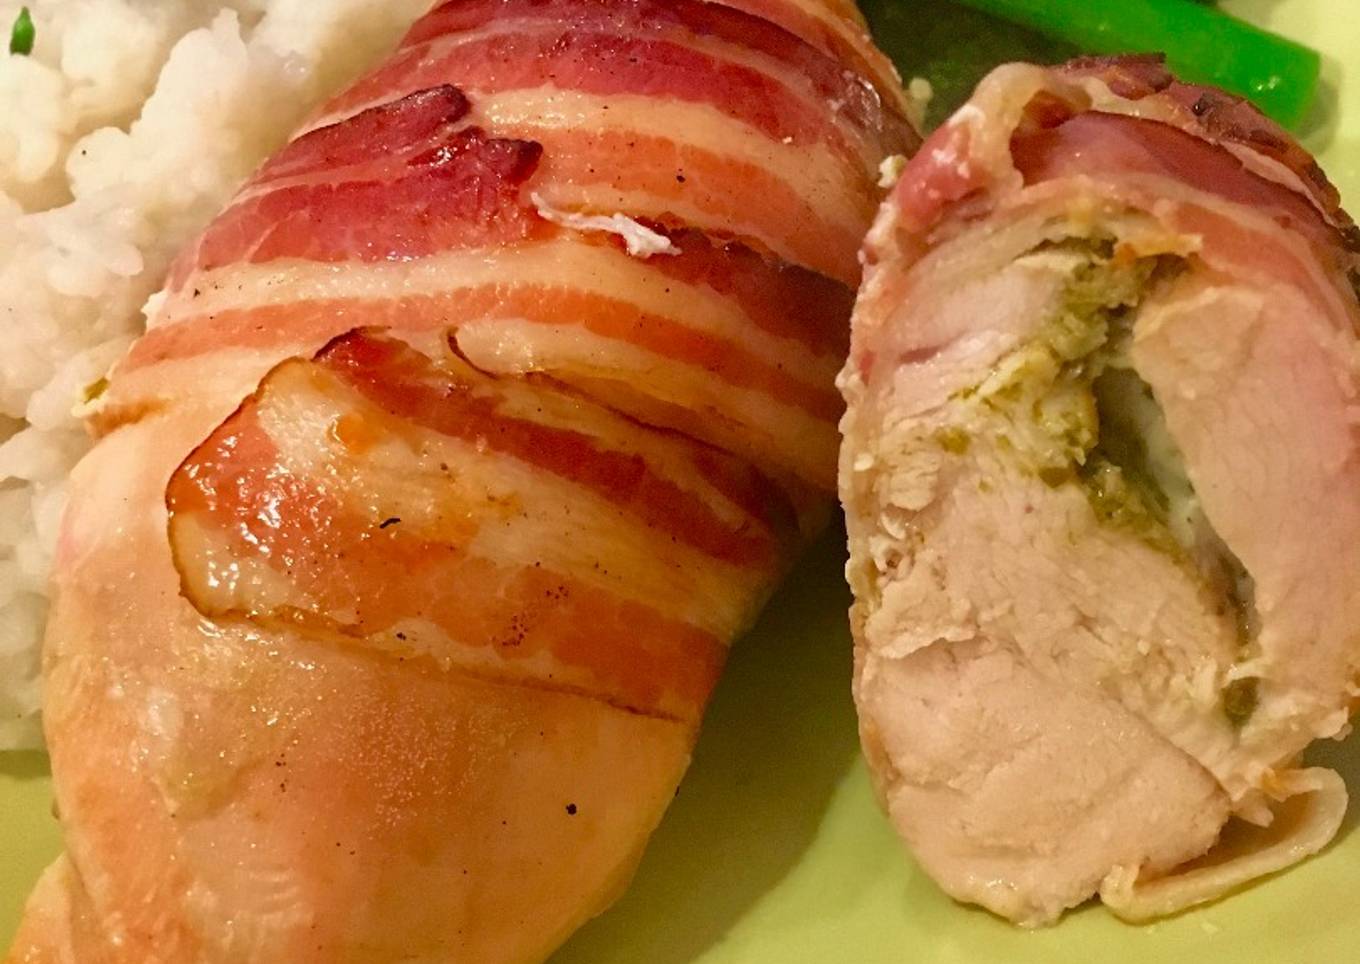 Chicken stuffed with Mozzarella and Pesto, Wrapped in Streaky Bacon